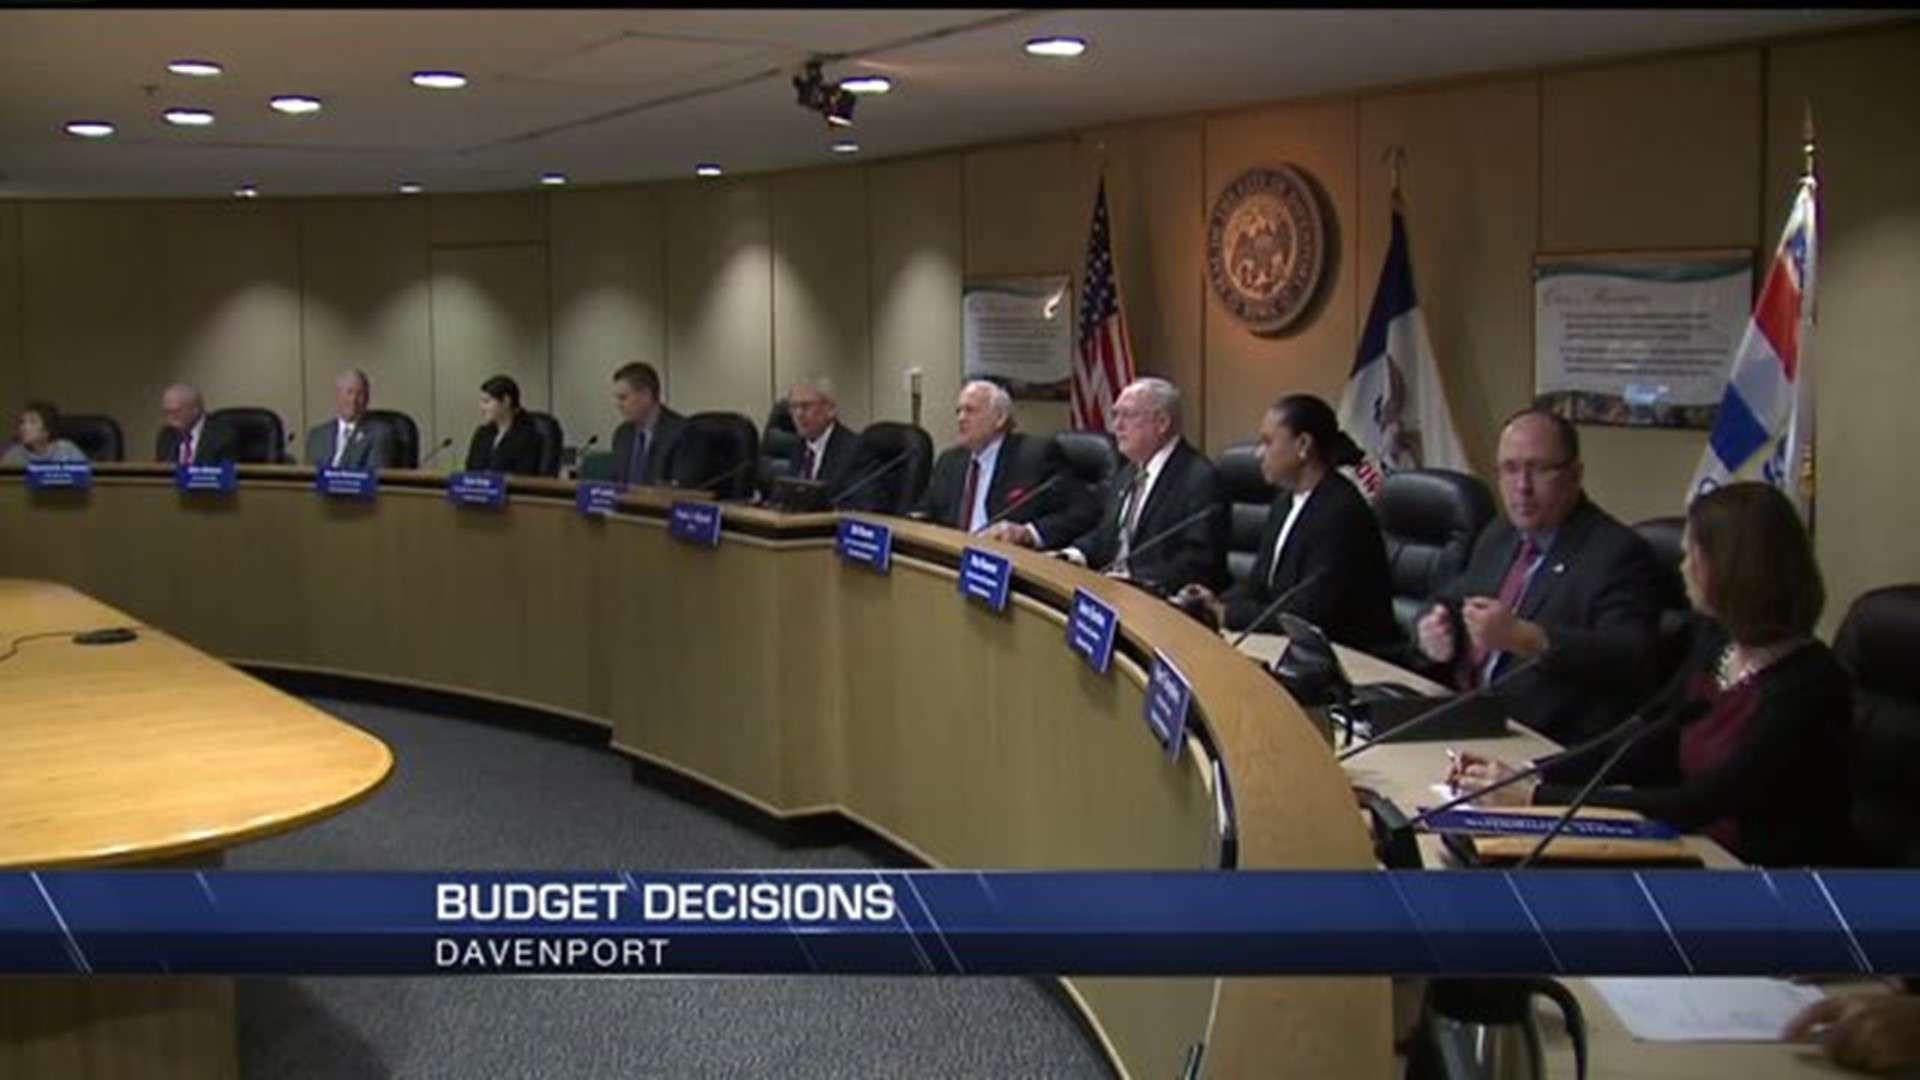 Non for profits ask Davenport for $2M